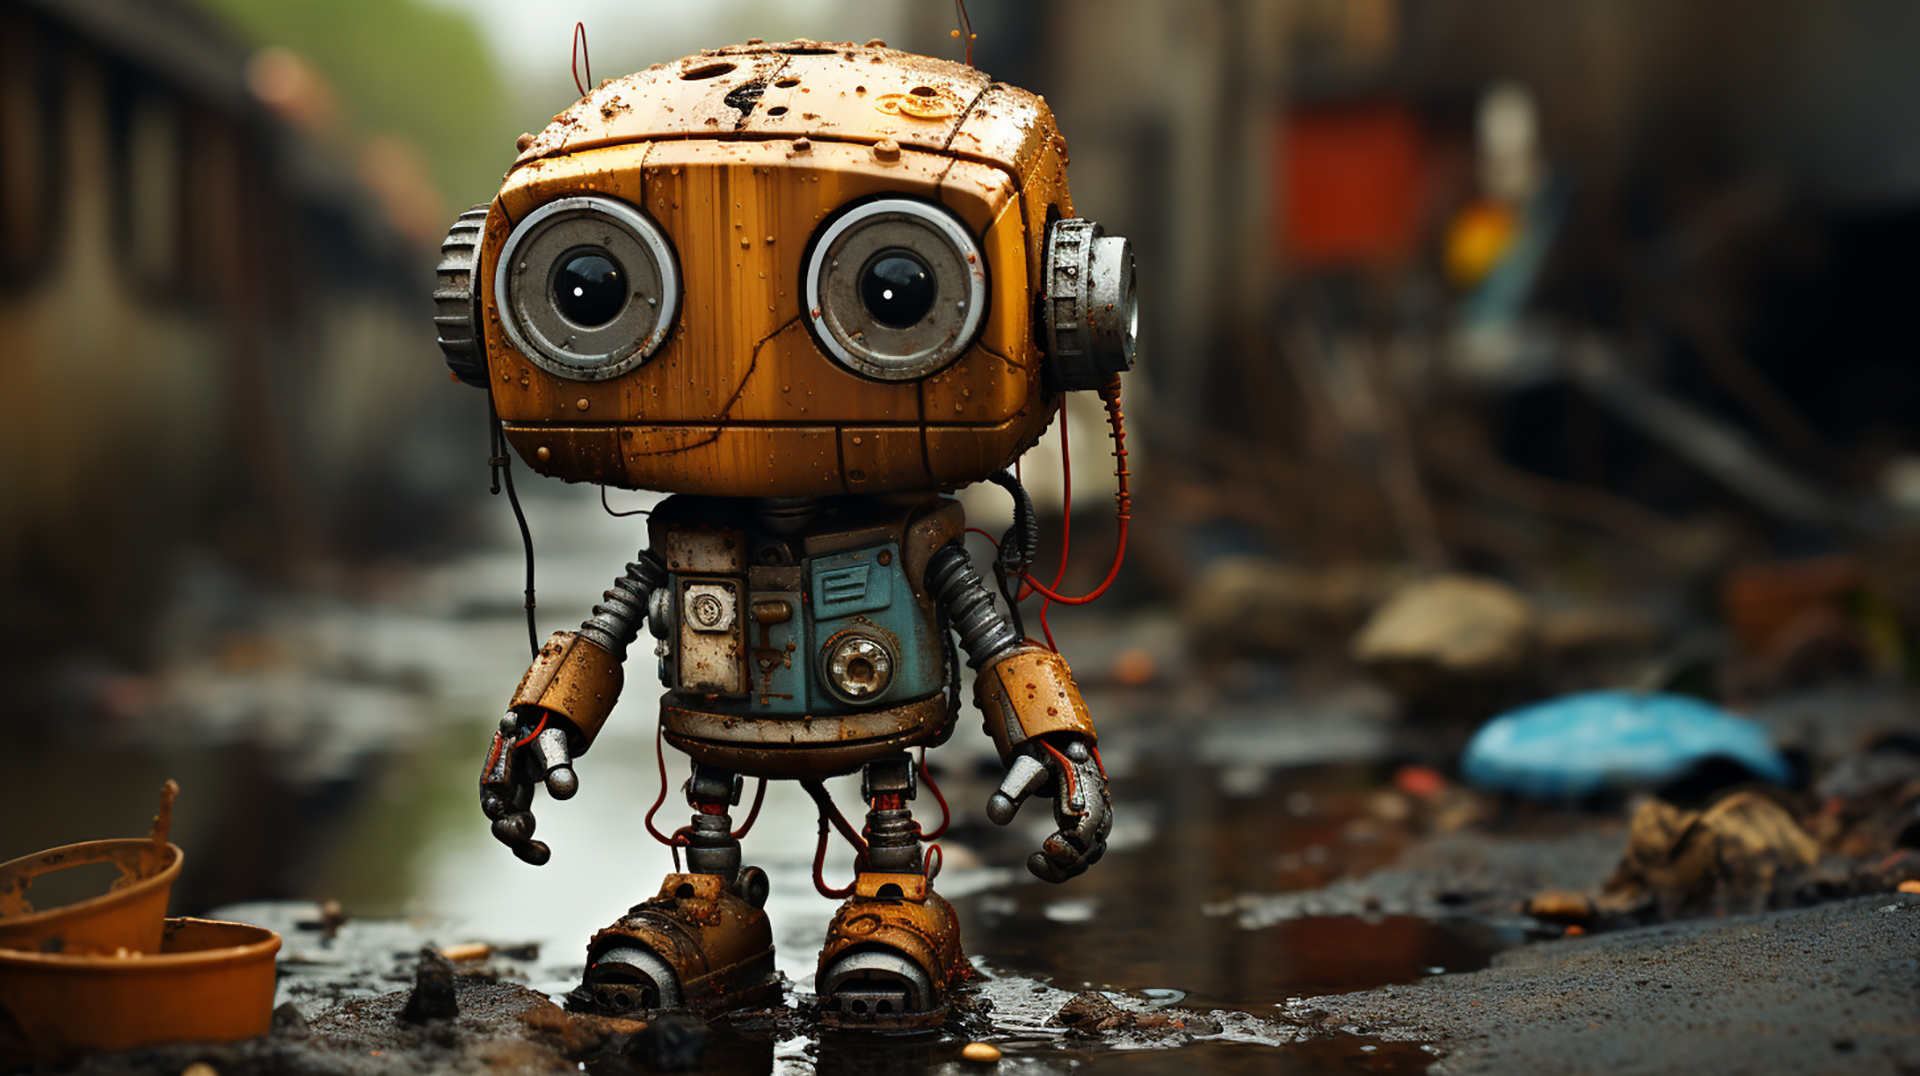 Epic AI Encounters - Download Free Robot Wallpapers